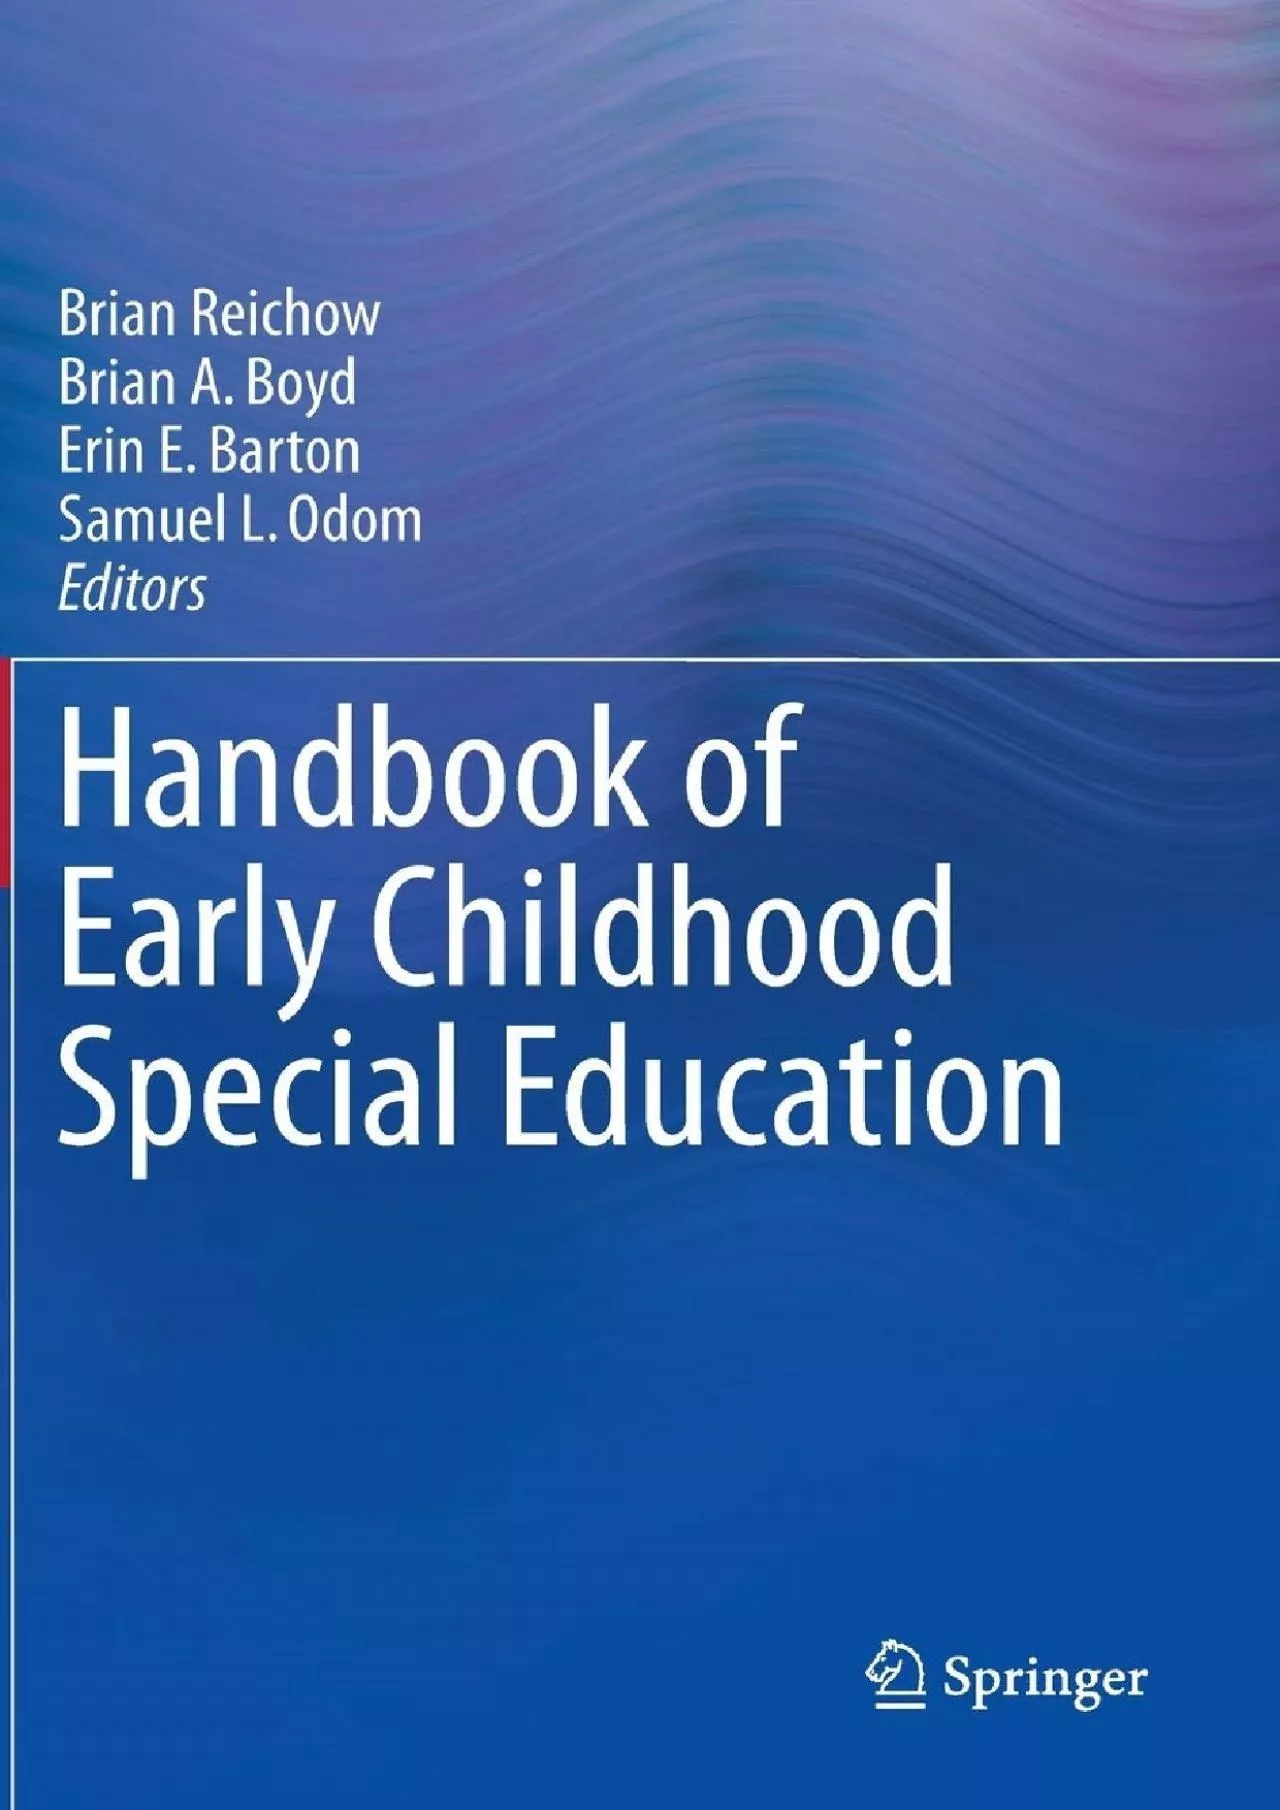 (DOWNLOAD)-Handbook of Early Childhood Special Education